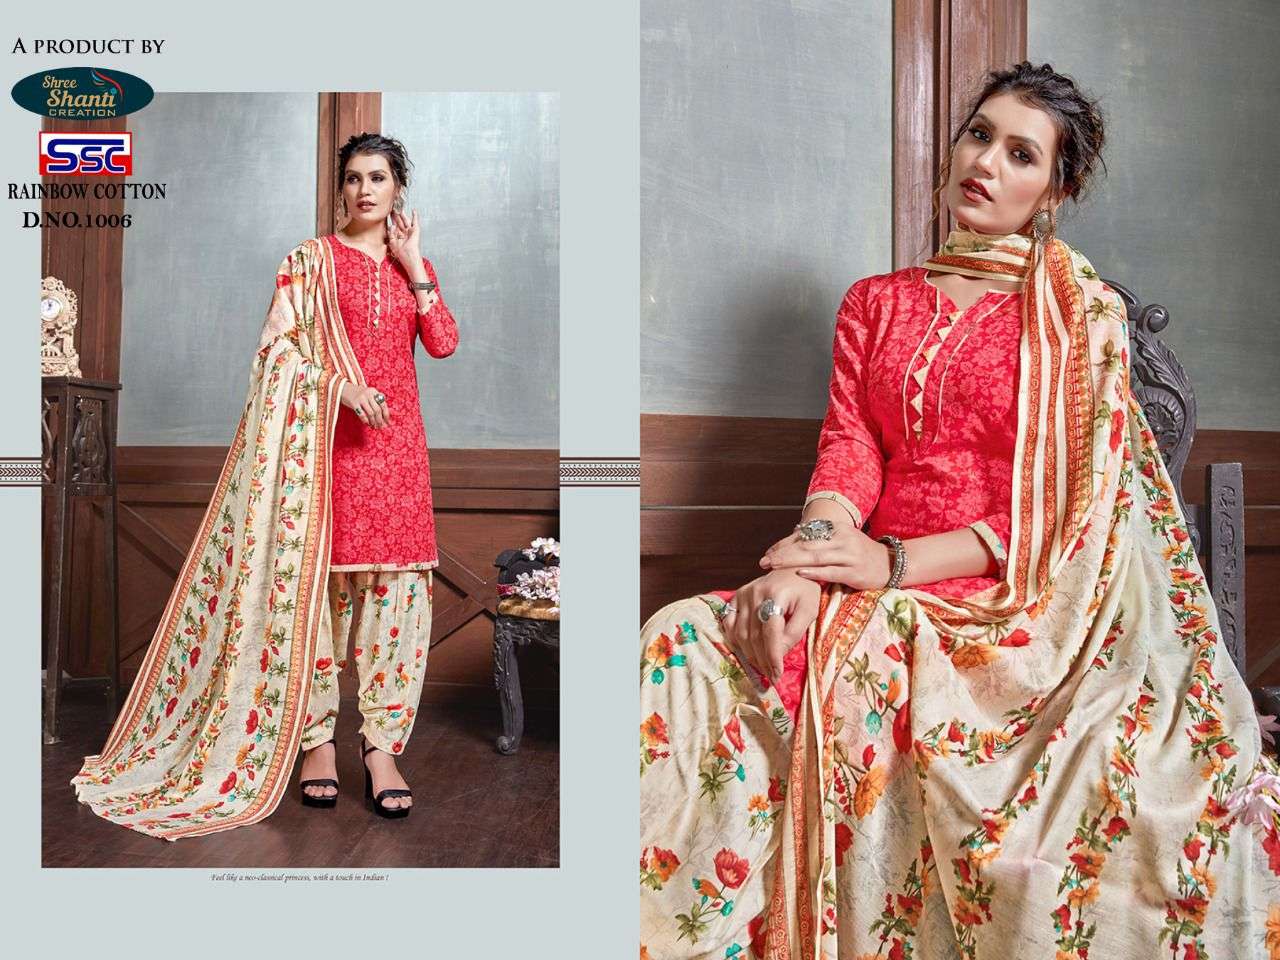 RAINBOW COTTON BY SHREE SHANTI CREAYION 1001 TO 1010 SERIES BEAUTIFUL STYLISH SHARARA SUITS FANCY COLORFUL CASUAL WEAR & ETHNIC WEAR & READY TO WEAR HEAVY COTTON PRINTED DRESSES AT WHOLESALE PRICE